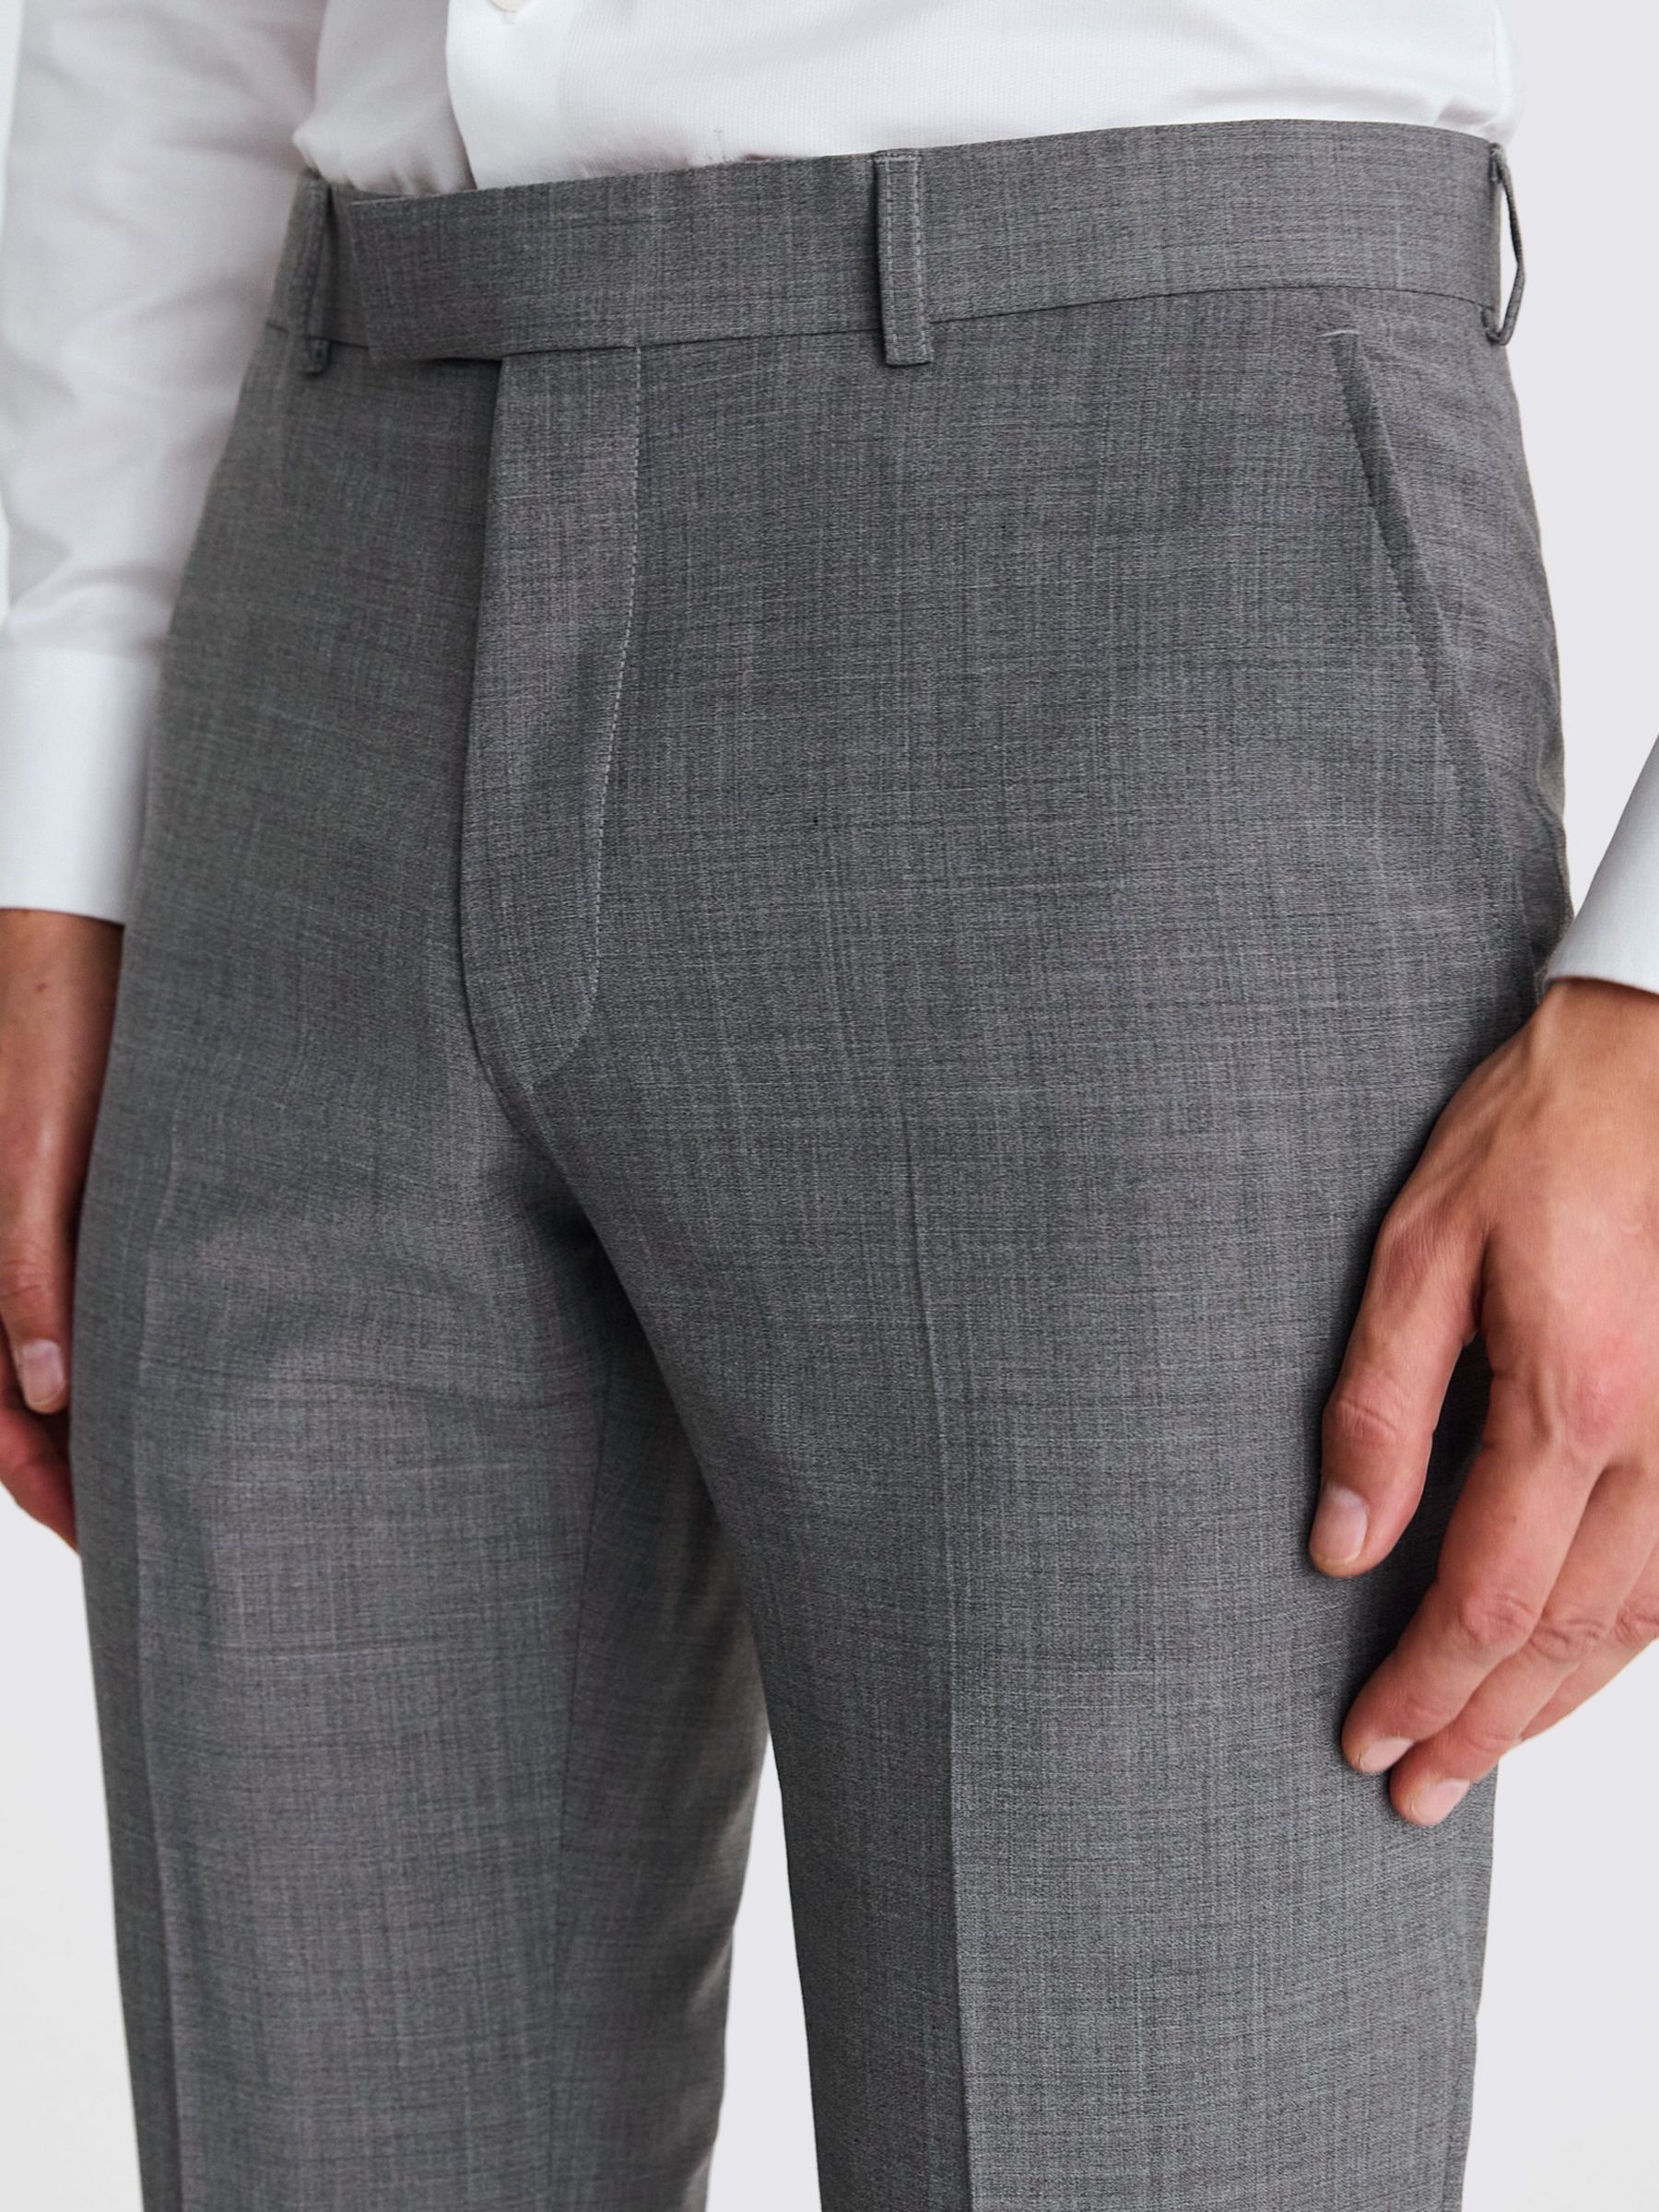 Buy Moss x DKNY Slim Fit Wool Blend Suit Trousers, Grey Online at johnlewis.com